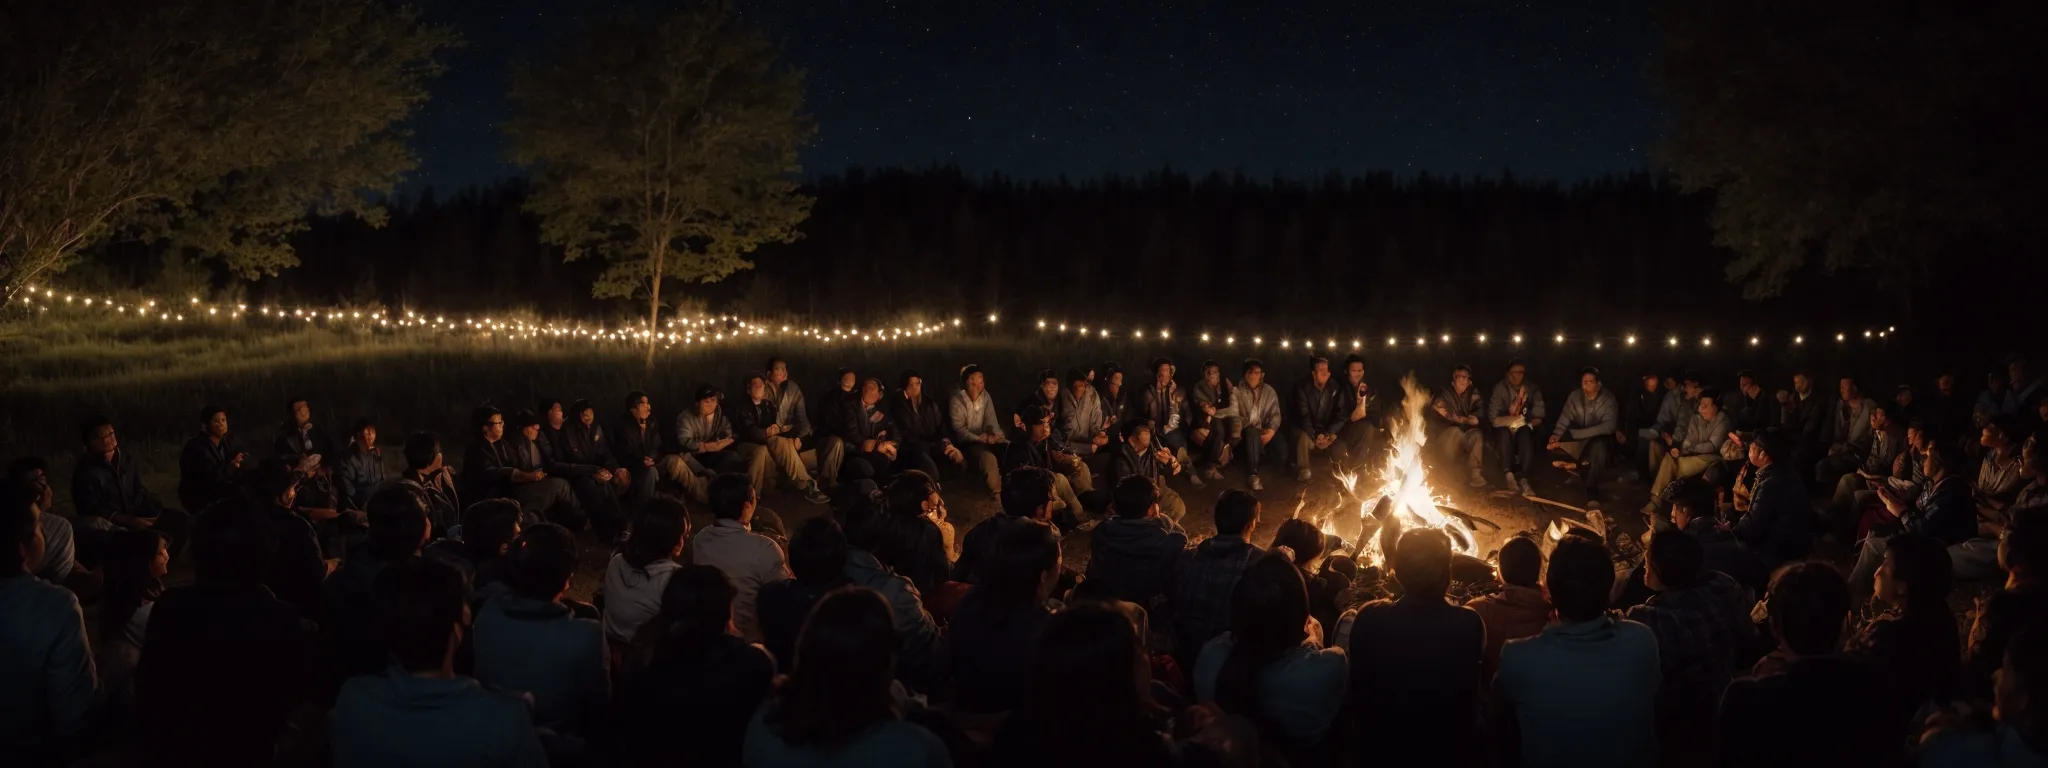 a speaker enthrals a captivated audience around a warm campfire under a starry night sky.